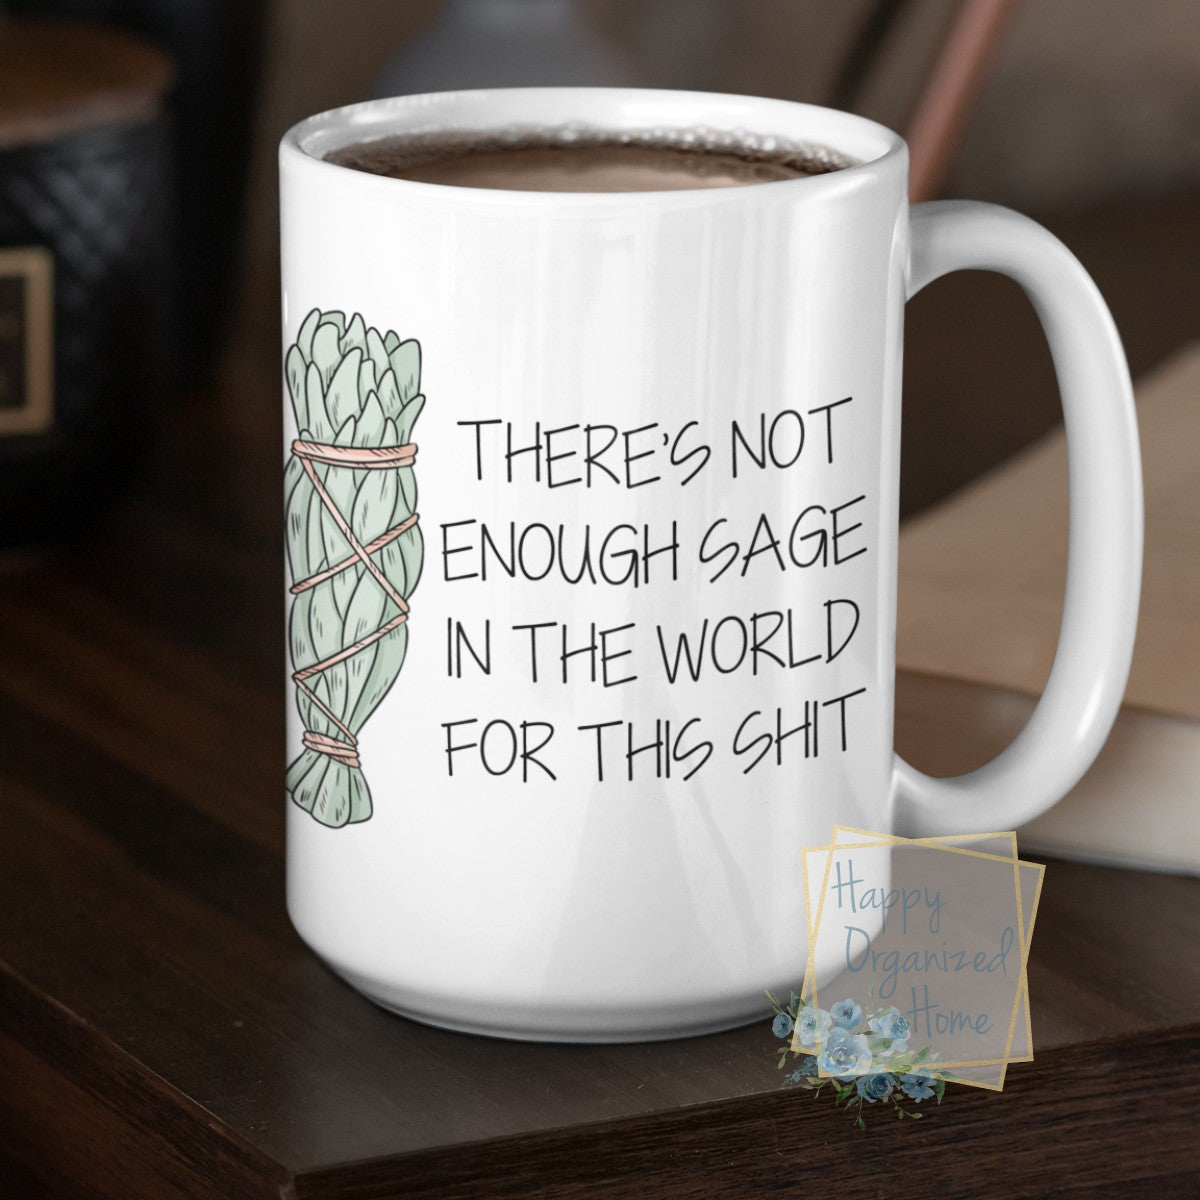 There is not enough Sage in the world for this shit. - Coffee Mug  Tea Mug